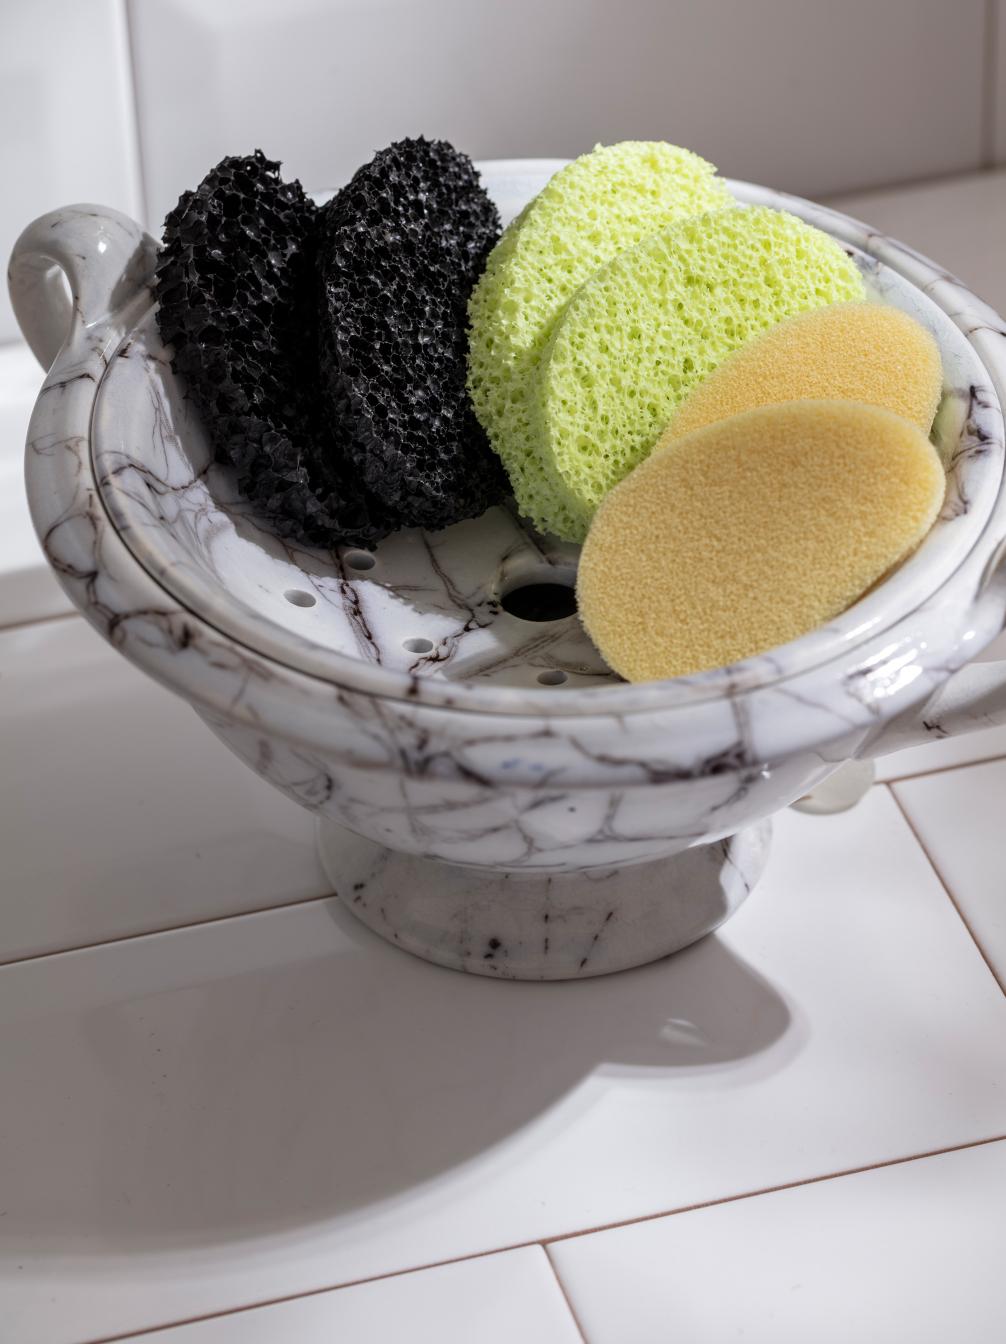 Make Up Remover Pads